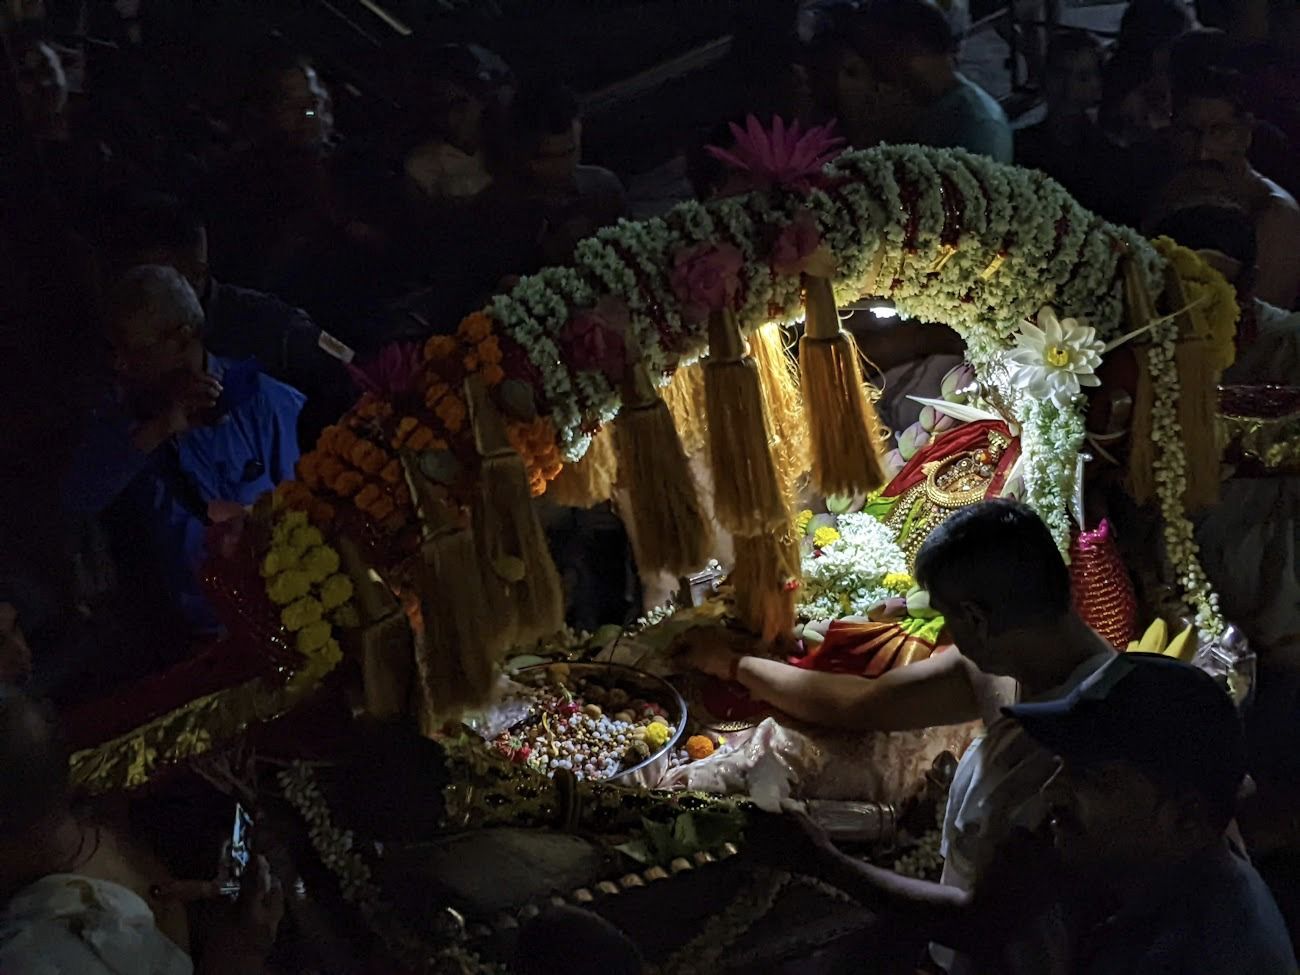 A ritual being performed in a temple